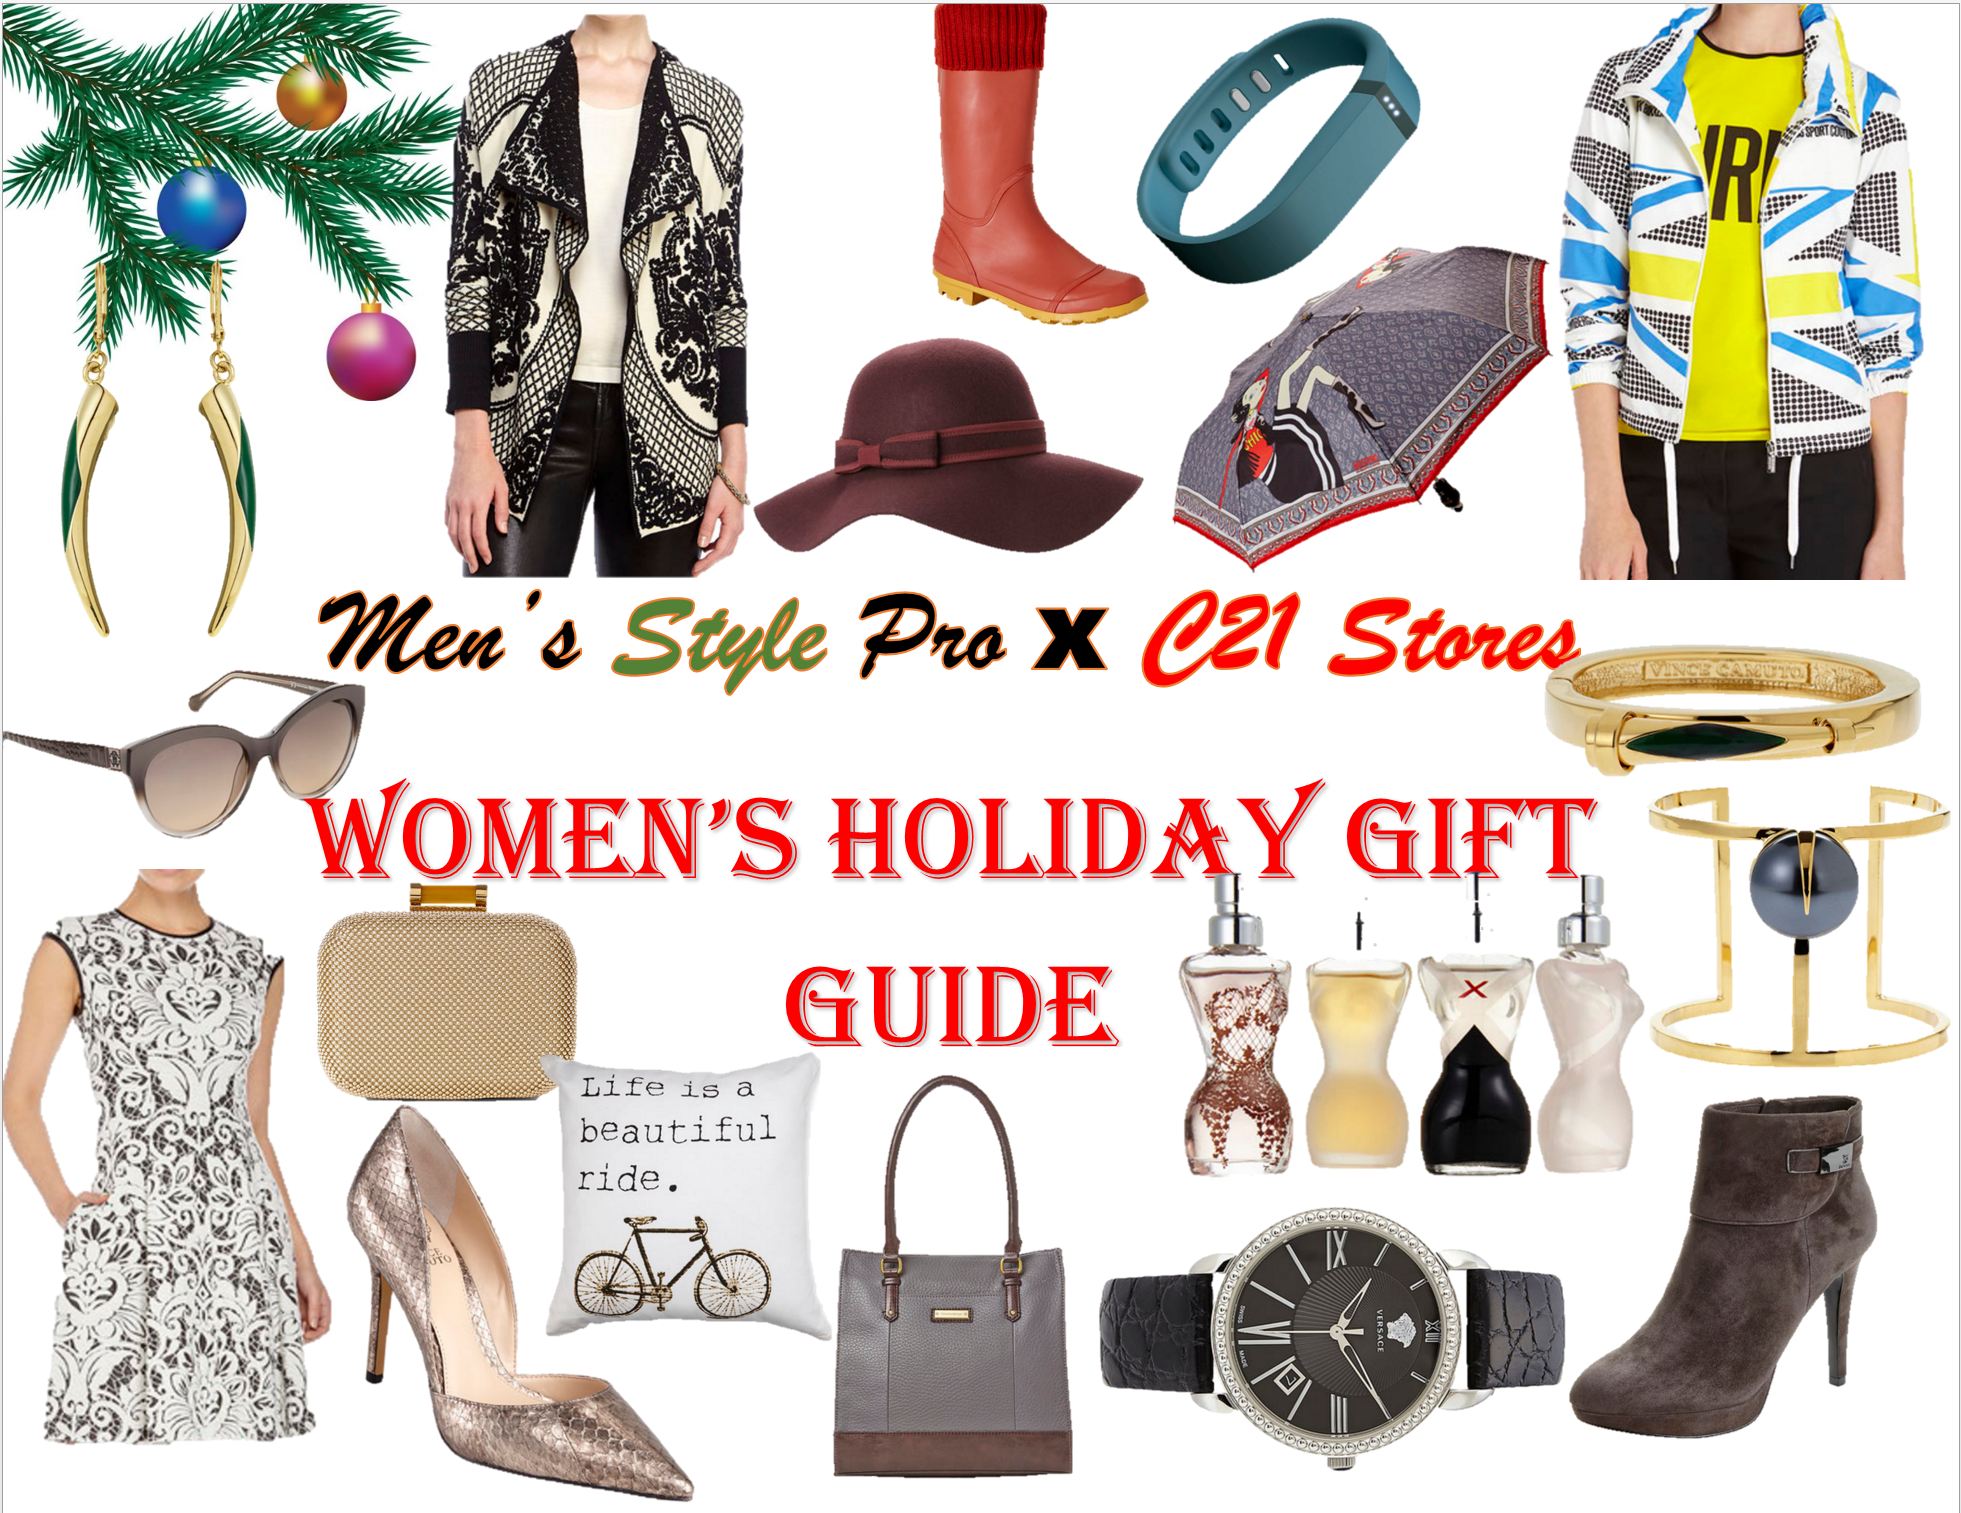 MSP x C21 Stores Women's Holiday Gift Guide